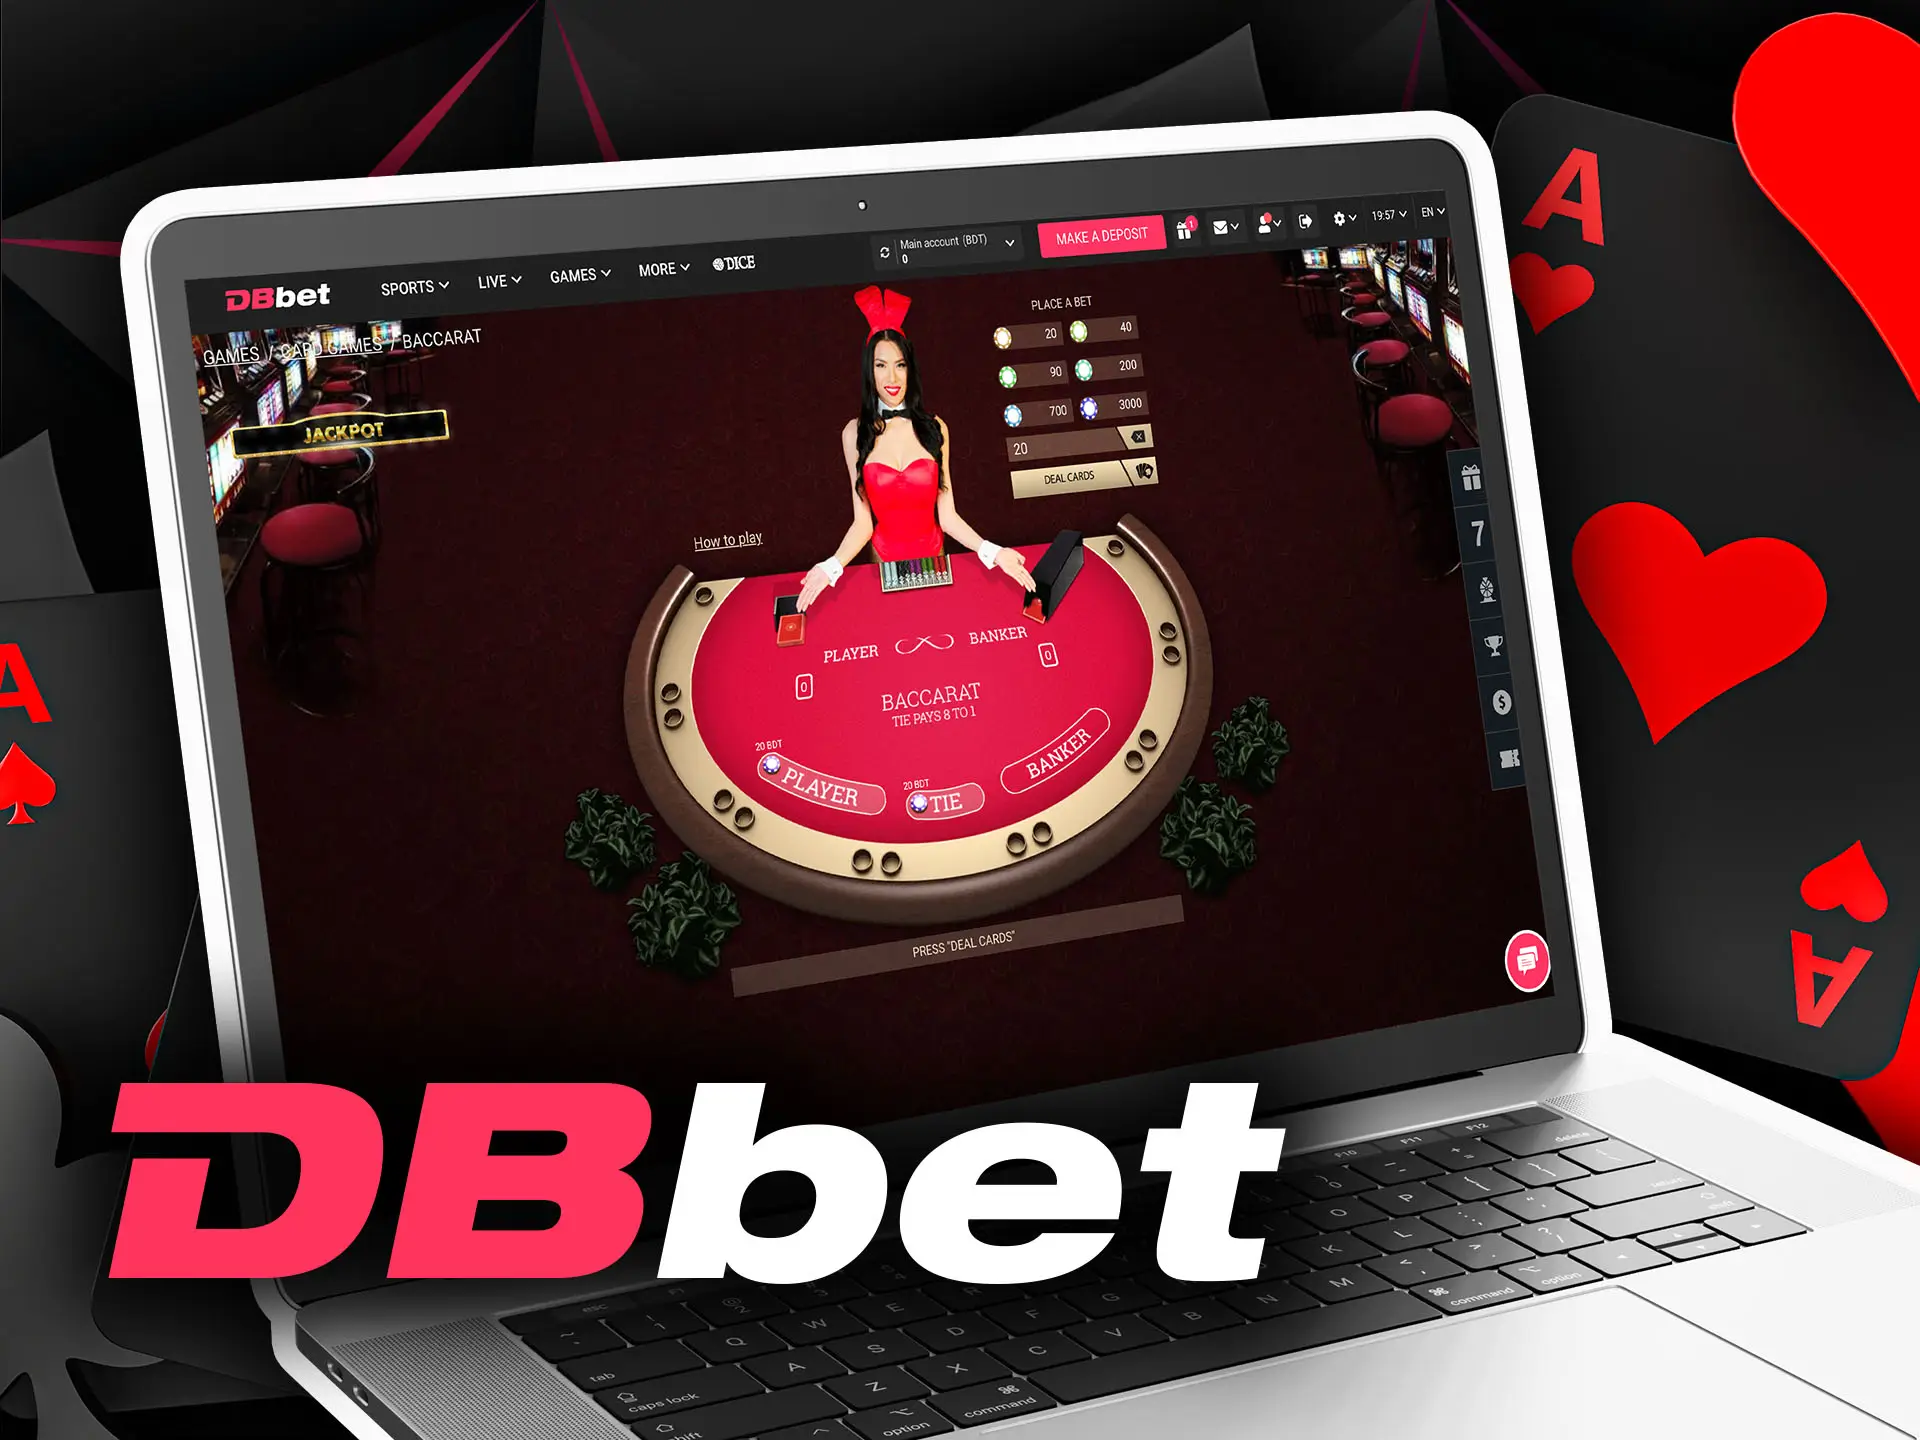 Baccarat is also among the DBbet casino entertainment.